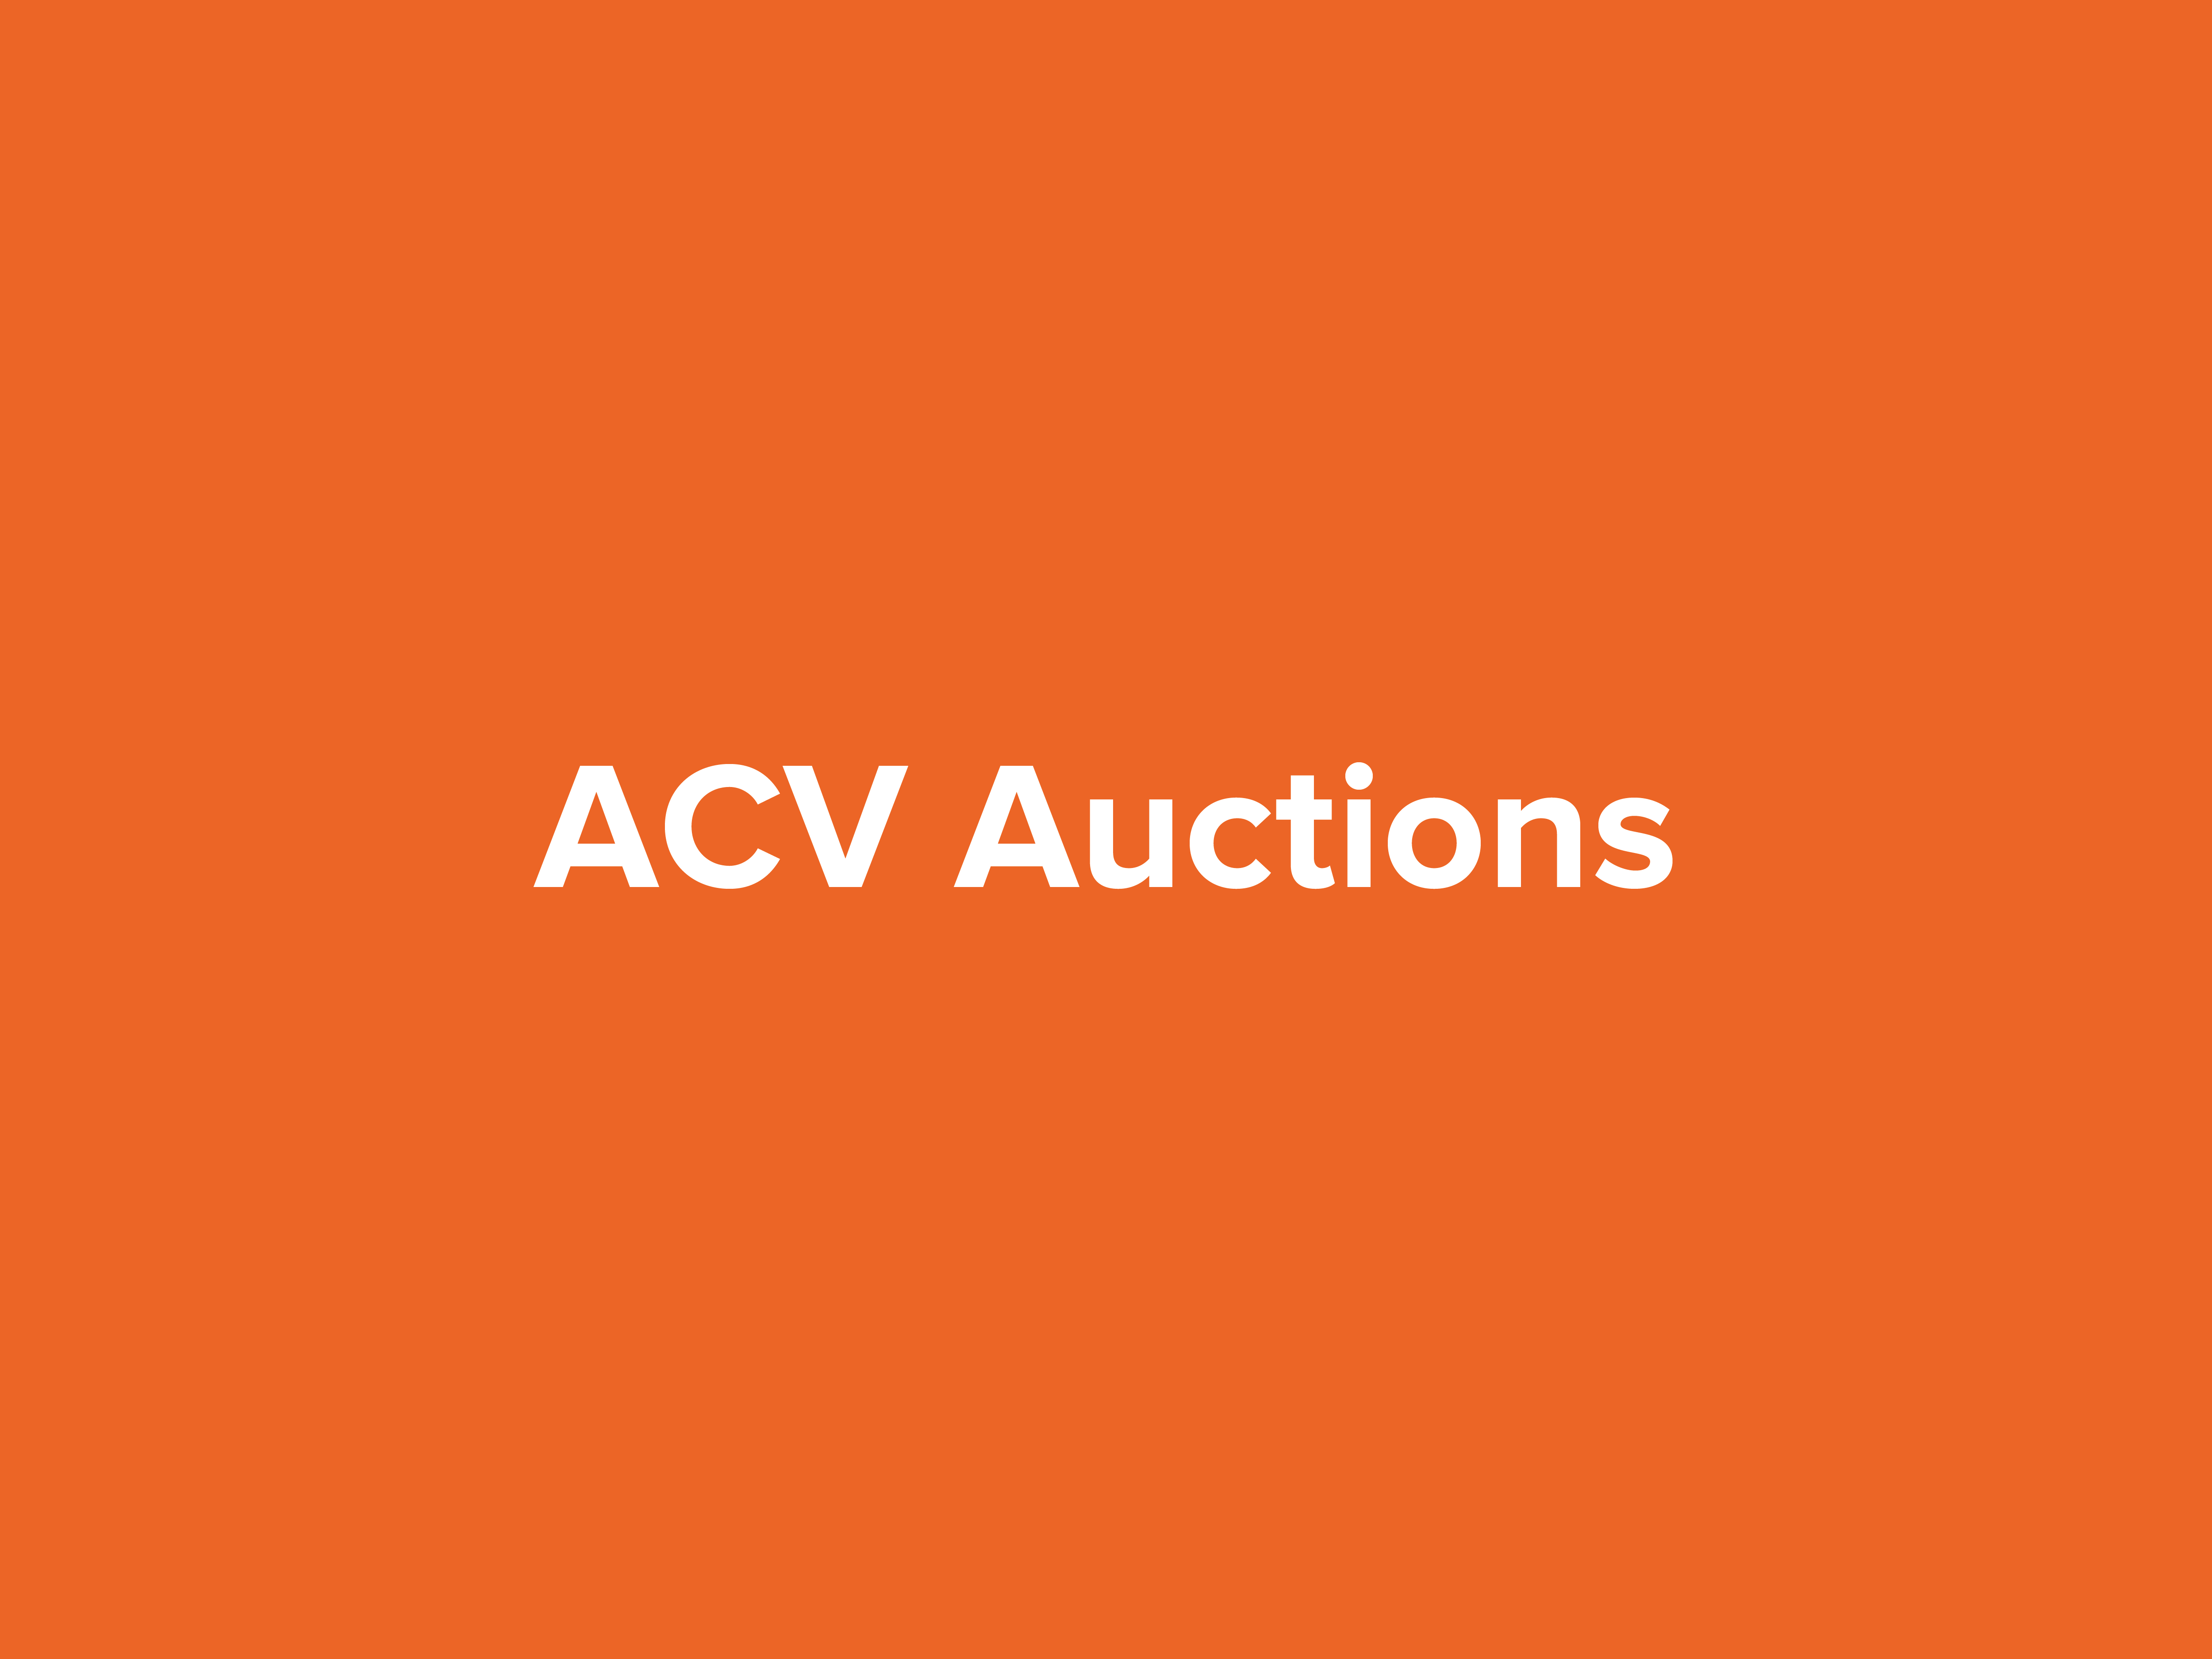 9ACV Auctions